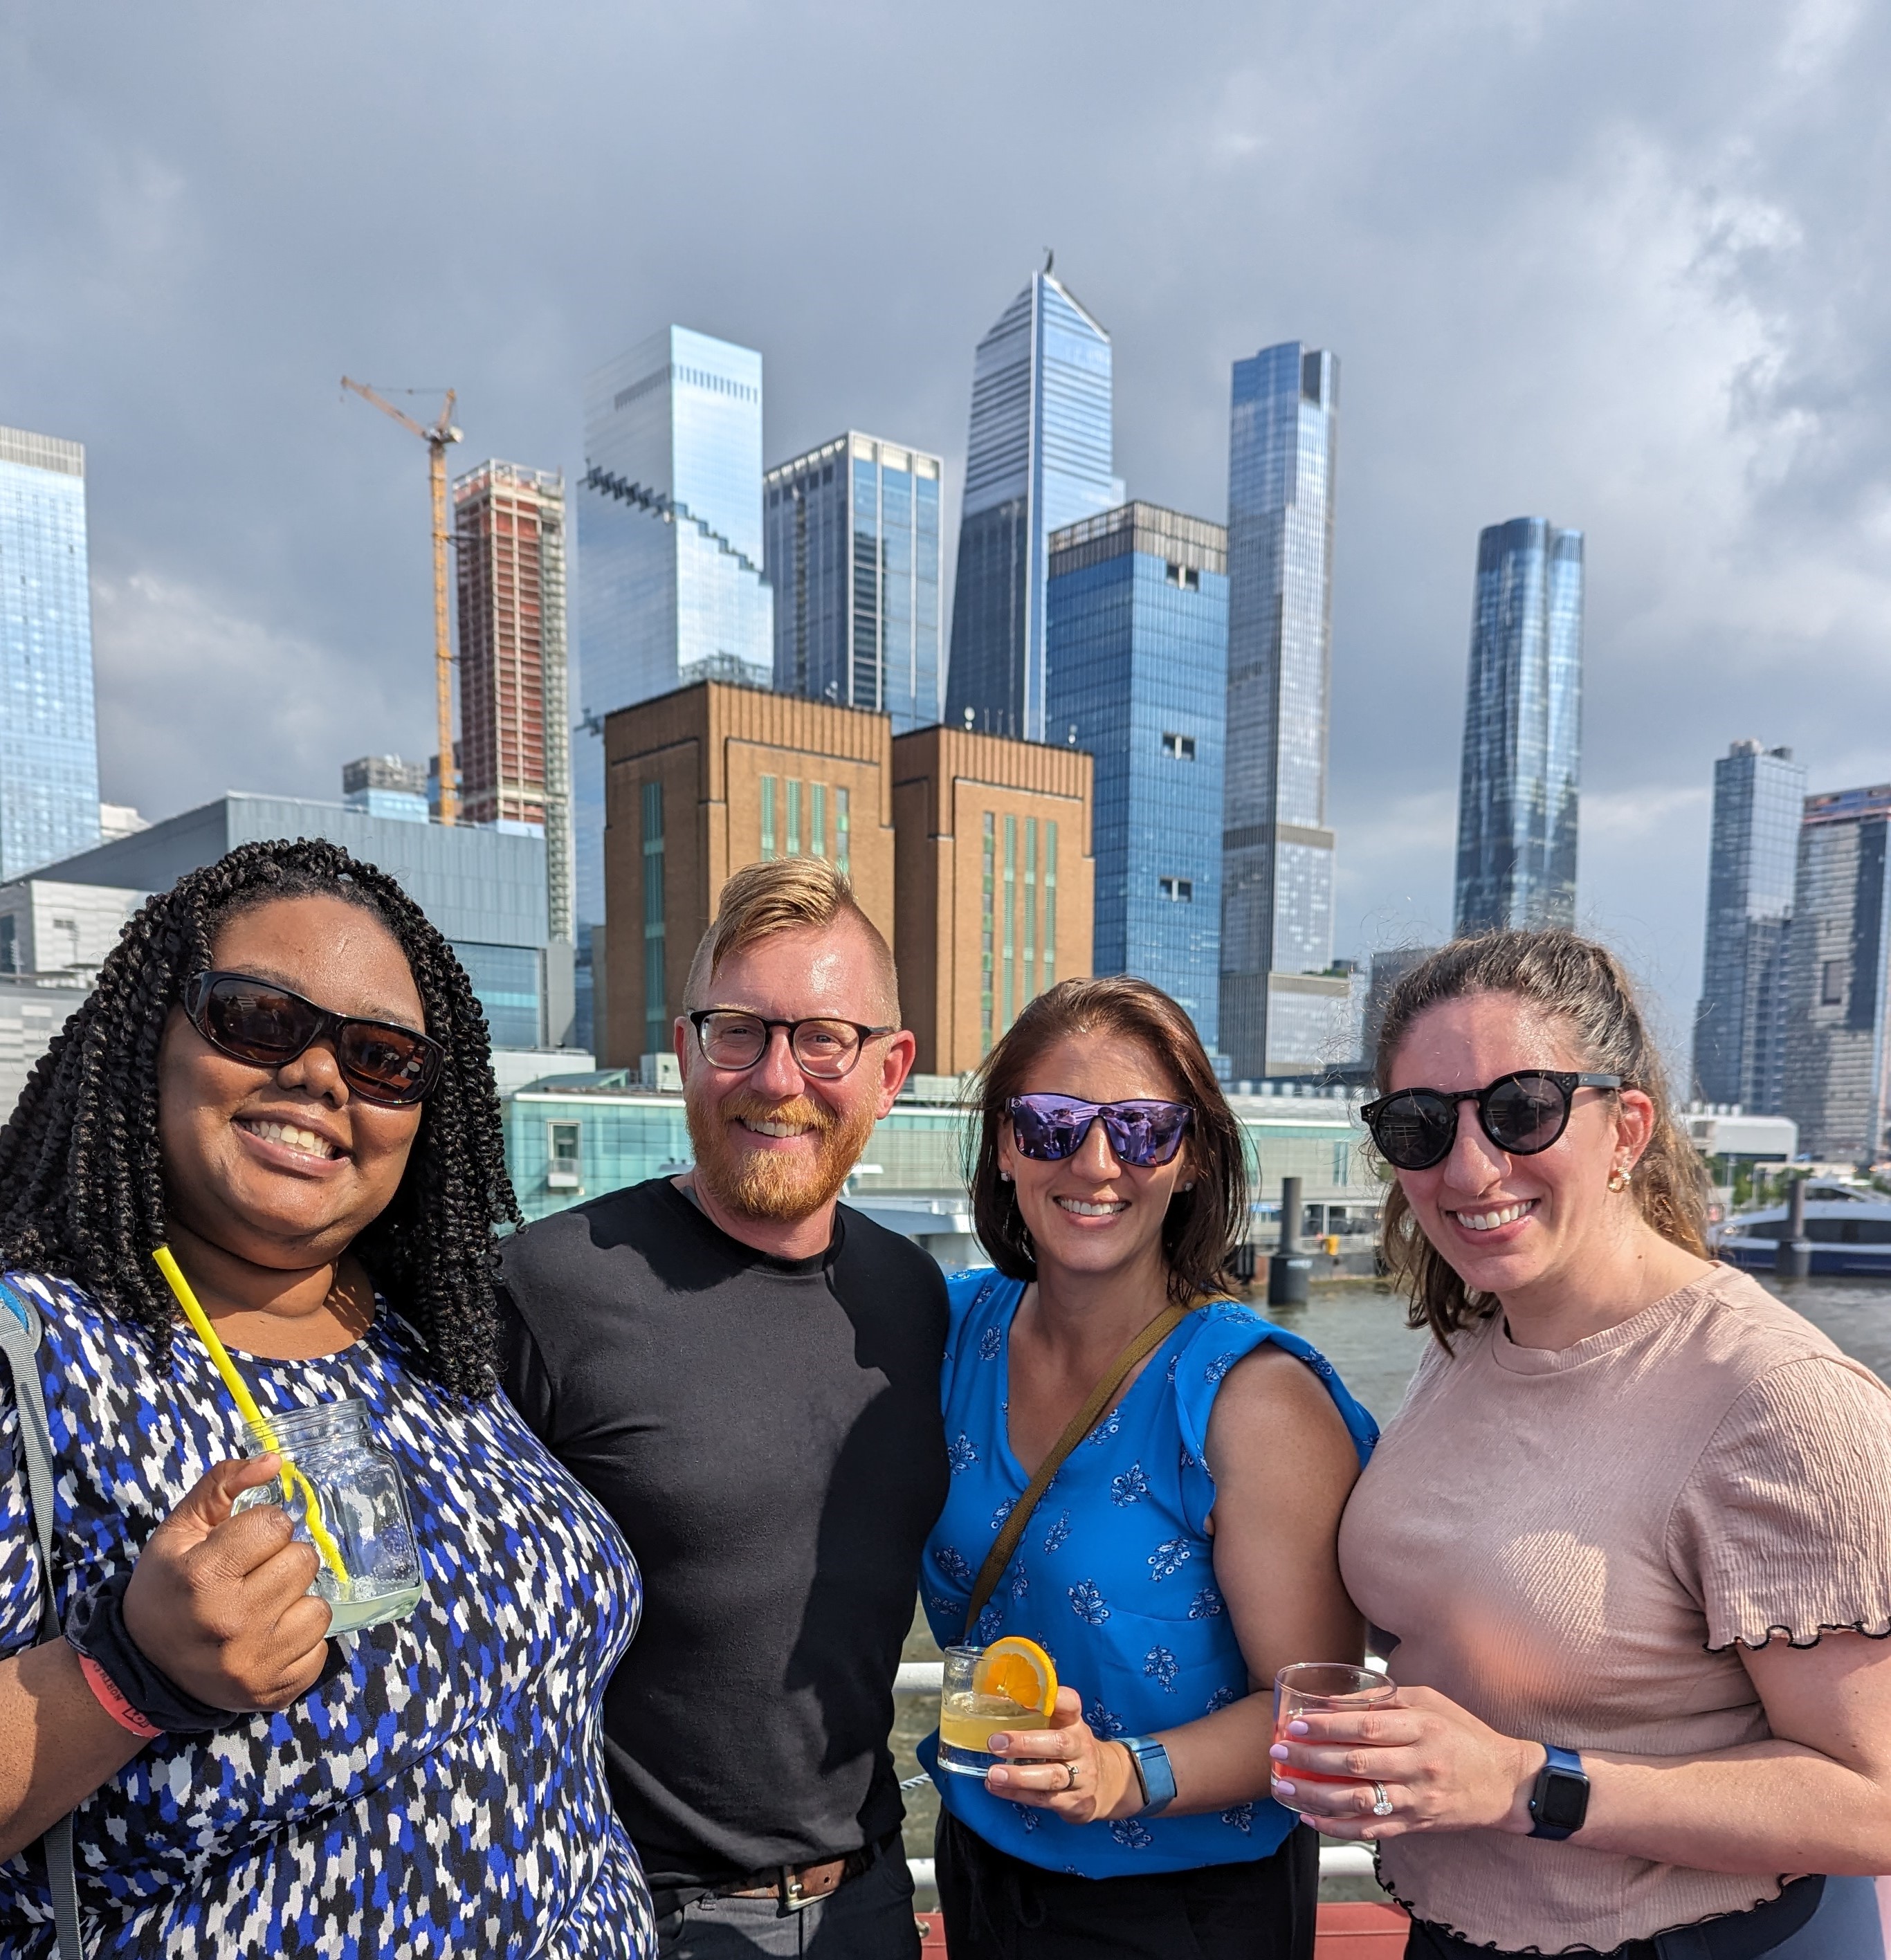 Meghan, Shannon,and Victoria are wearing sunglasses and holding cocktails. Photo taken on a boat; background is water and shiny, tall city buildings.